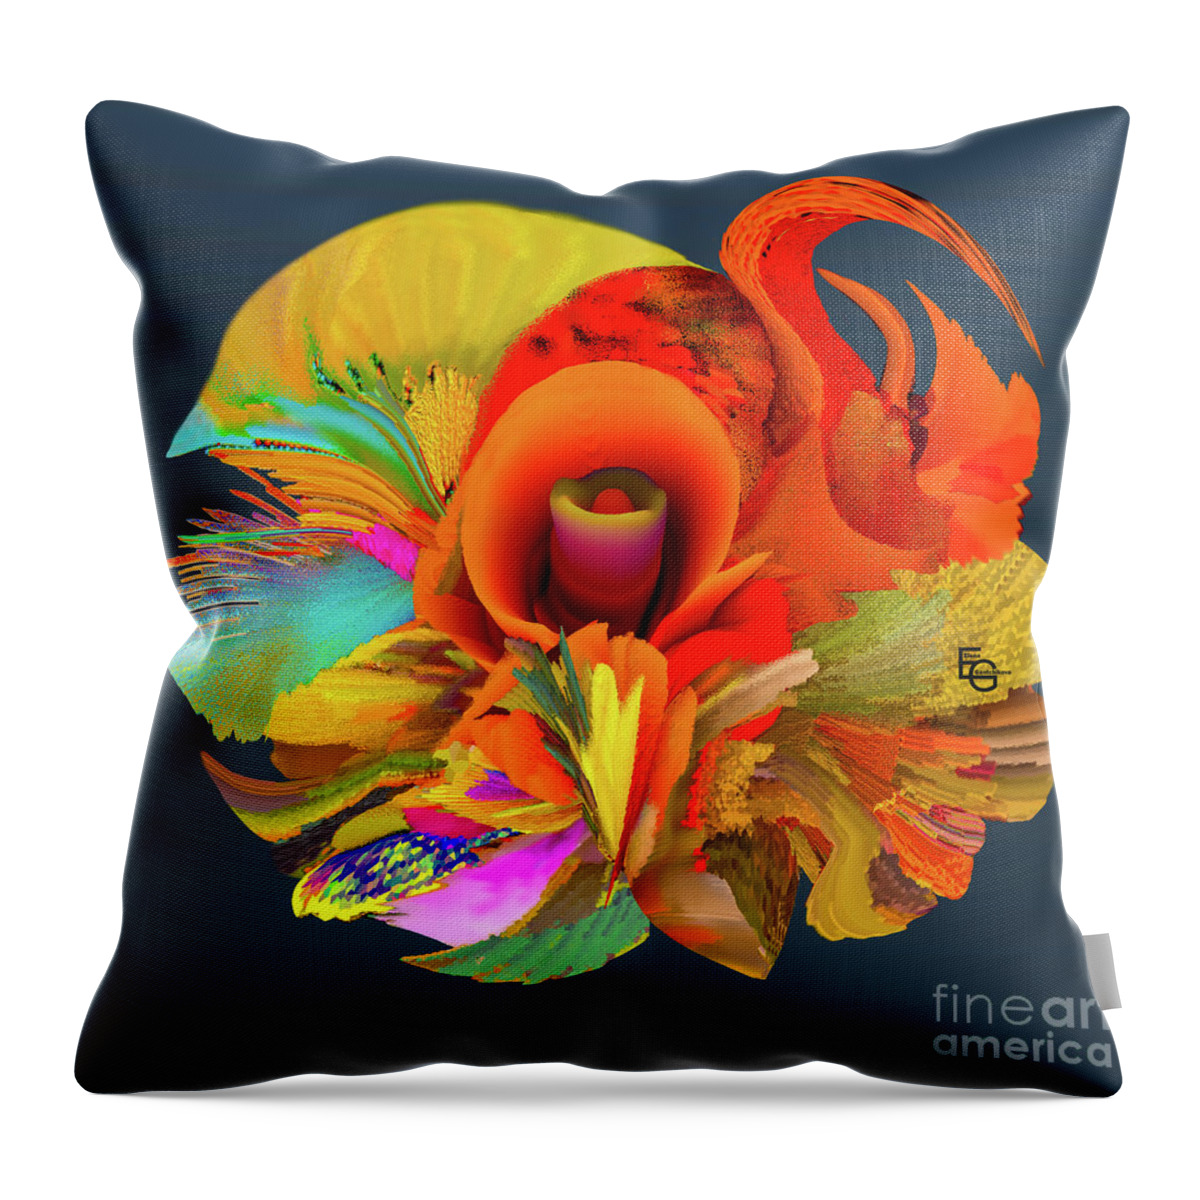 Flower Throw Pillow featuring the mixed media Fantasy Flowers Of My Dreams 04.03.2023 by Elena Gantchikova